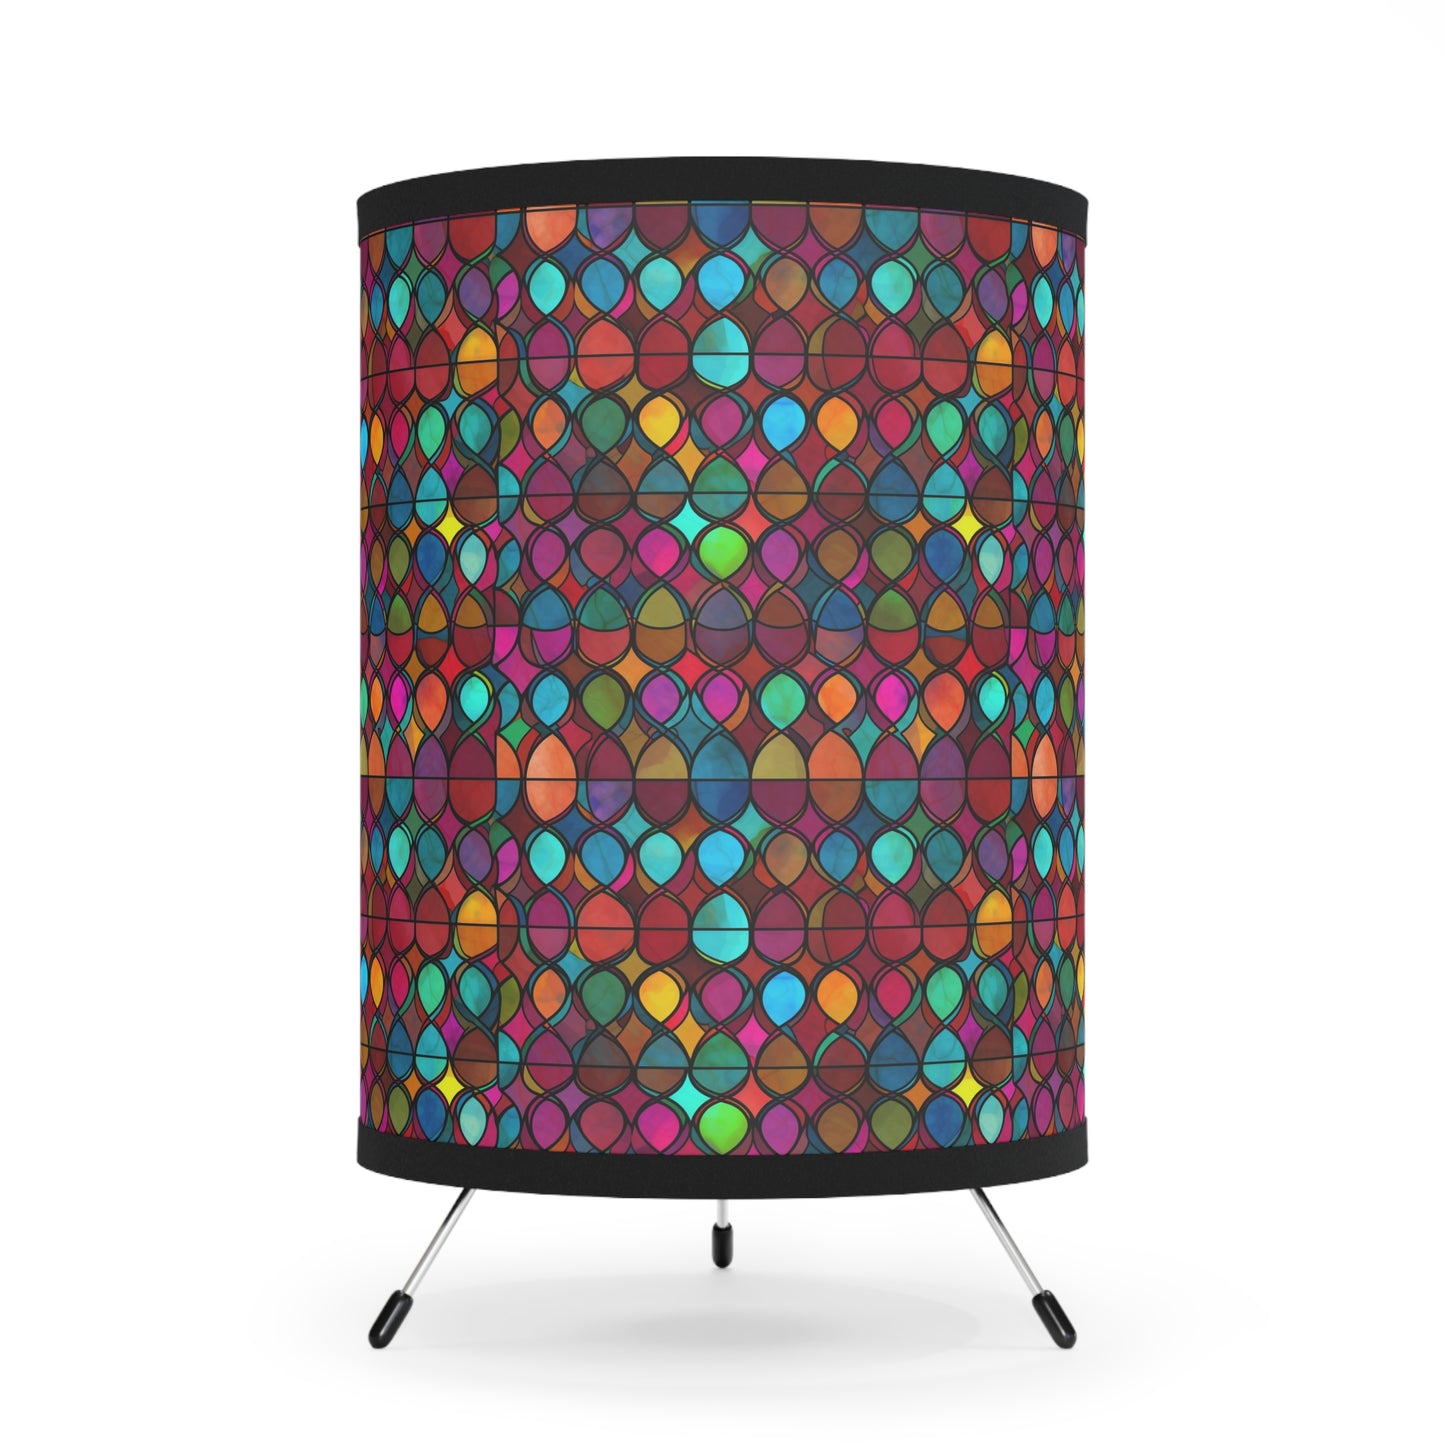 Stained Glass Mosaic Print - Tripod Lamp with High-Res Printed Shade, US\CA plug